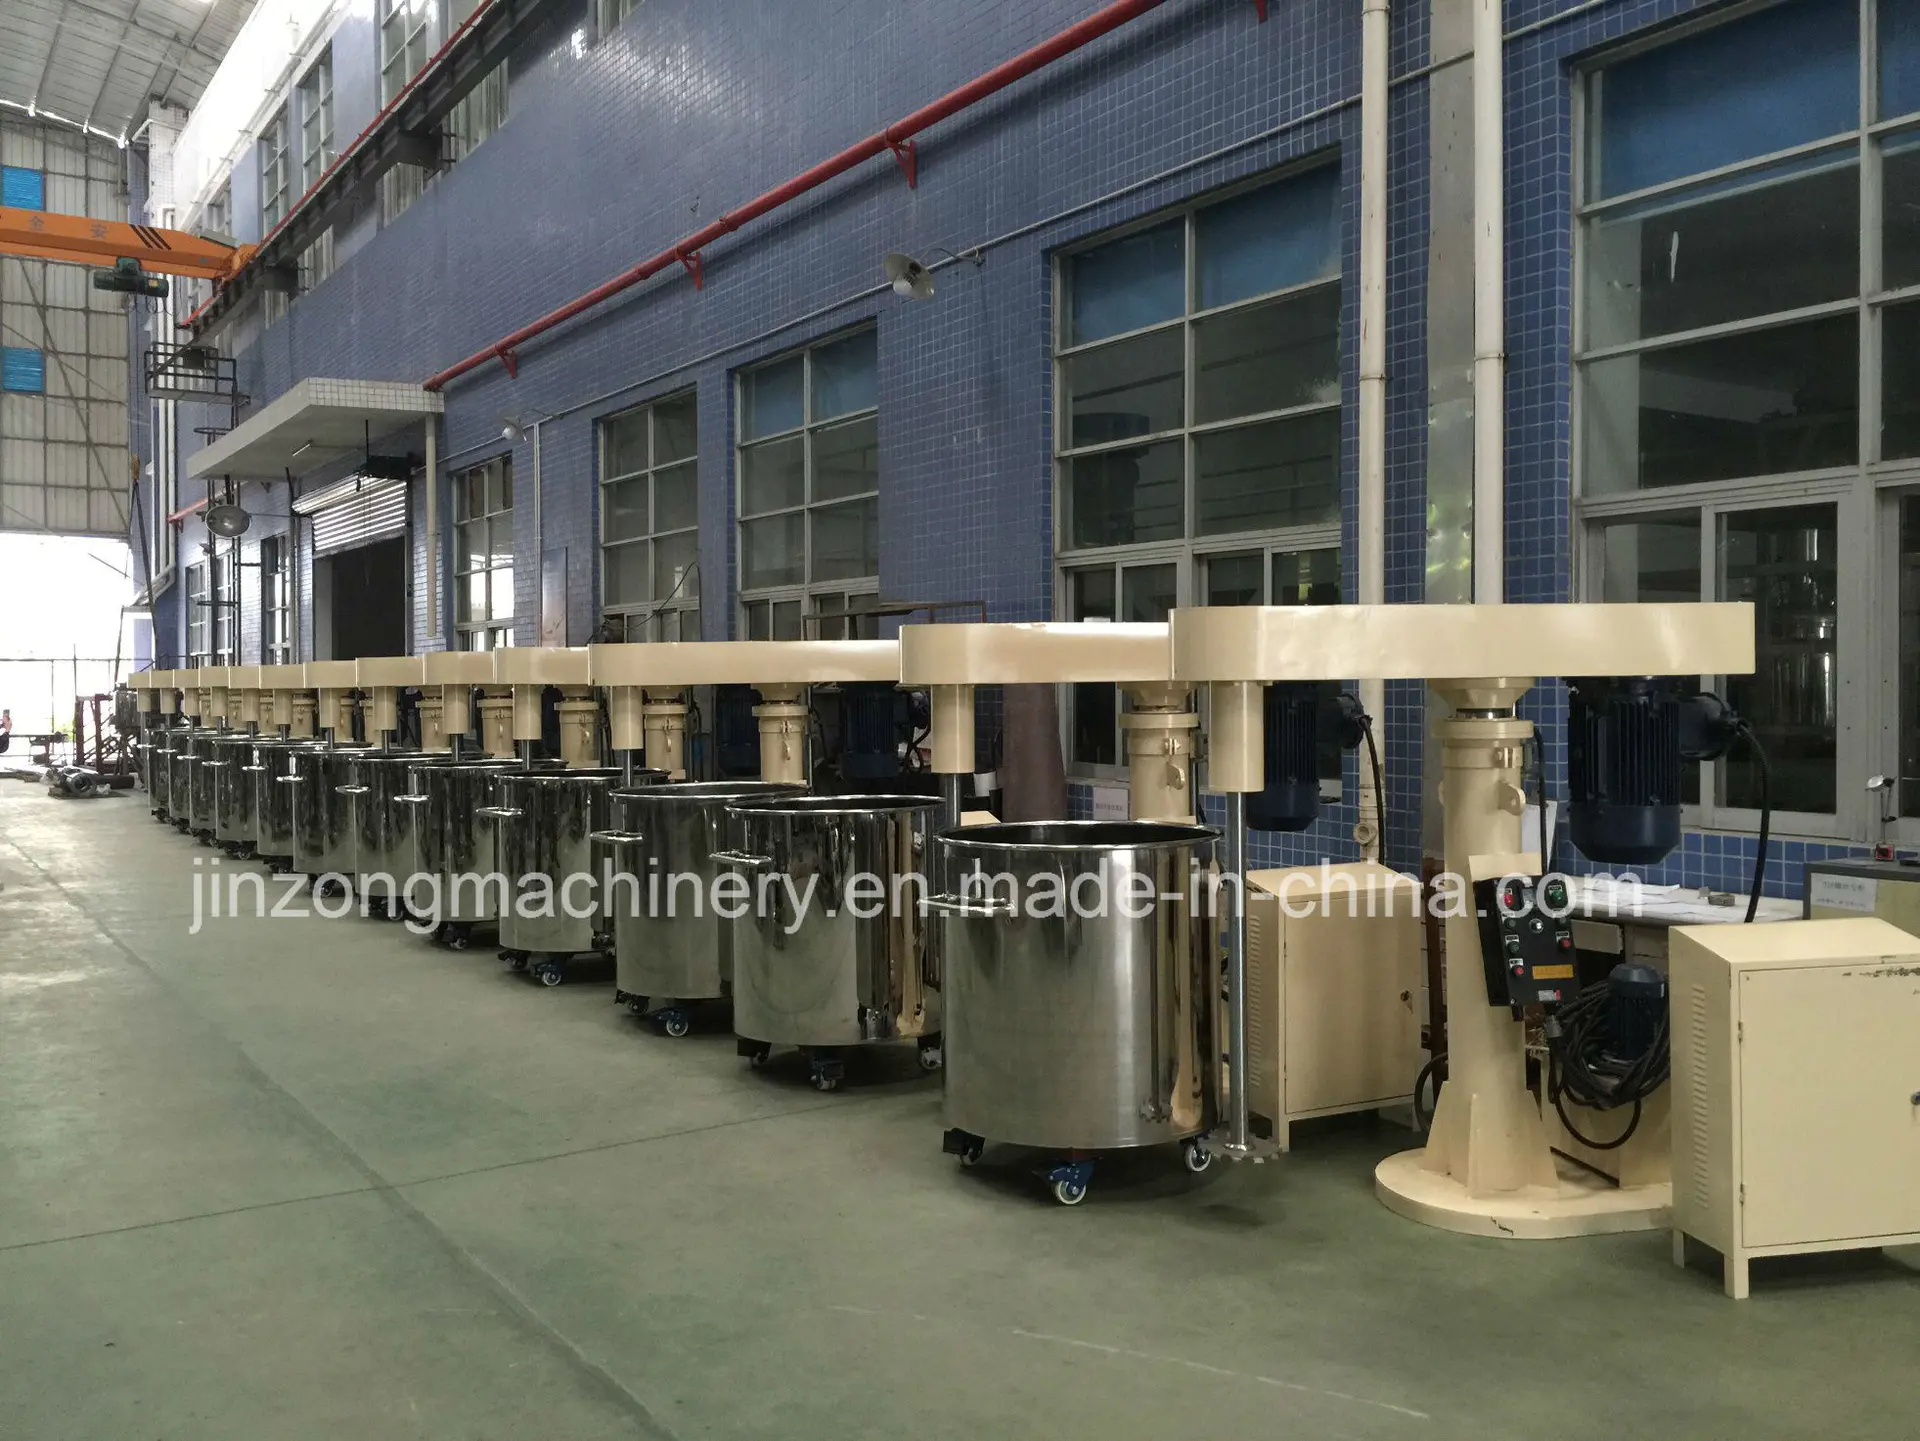 Hydraulic Lifting Dissolver Paint Mixer Making Machine for Interior&Exterior Wall Paint